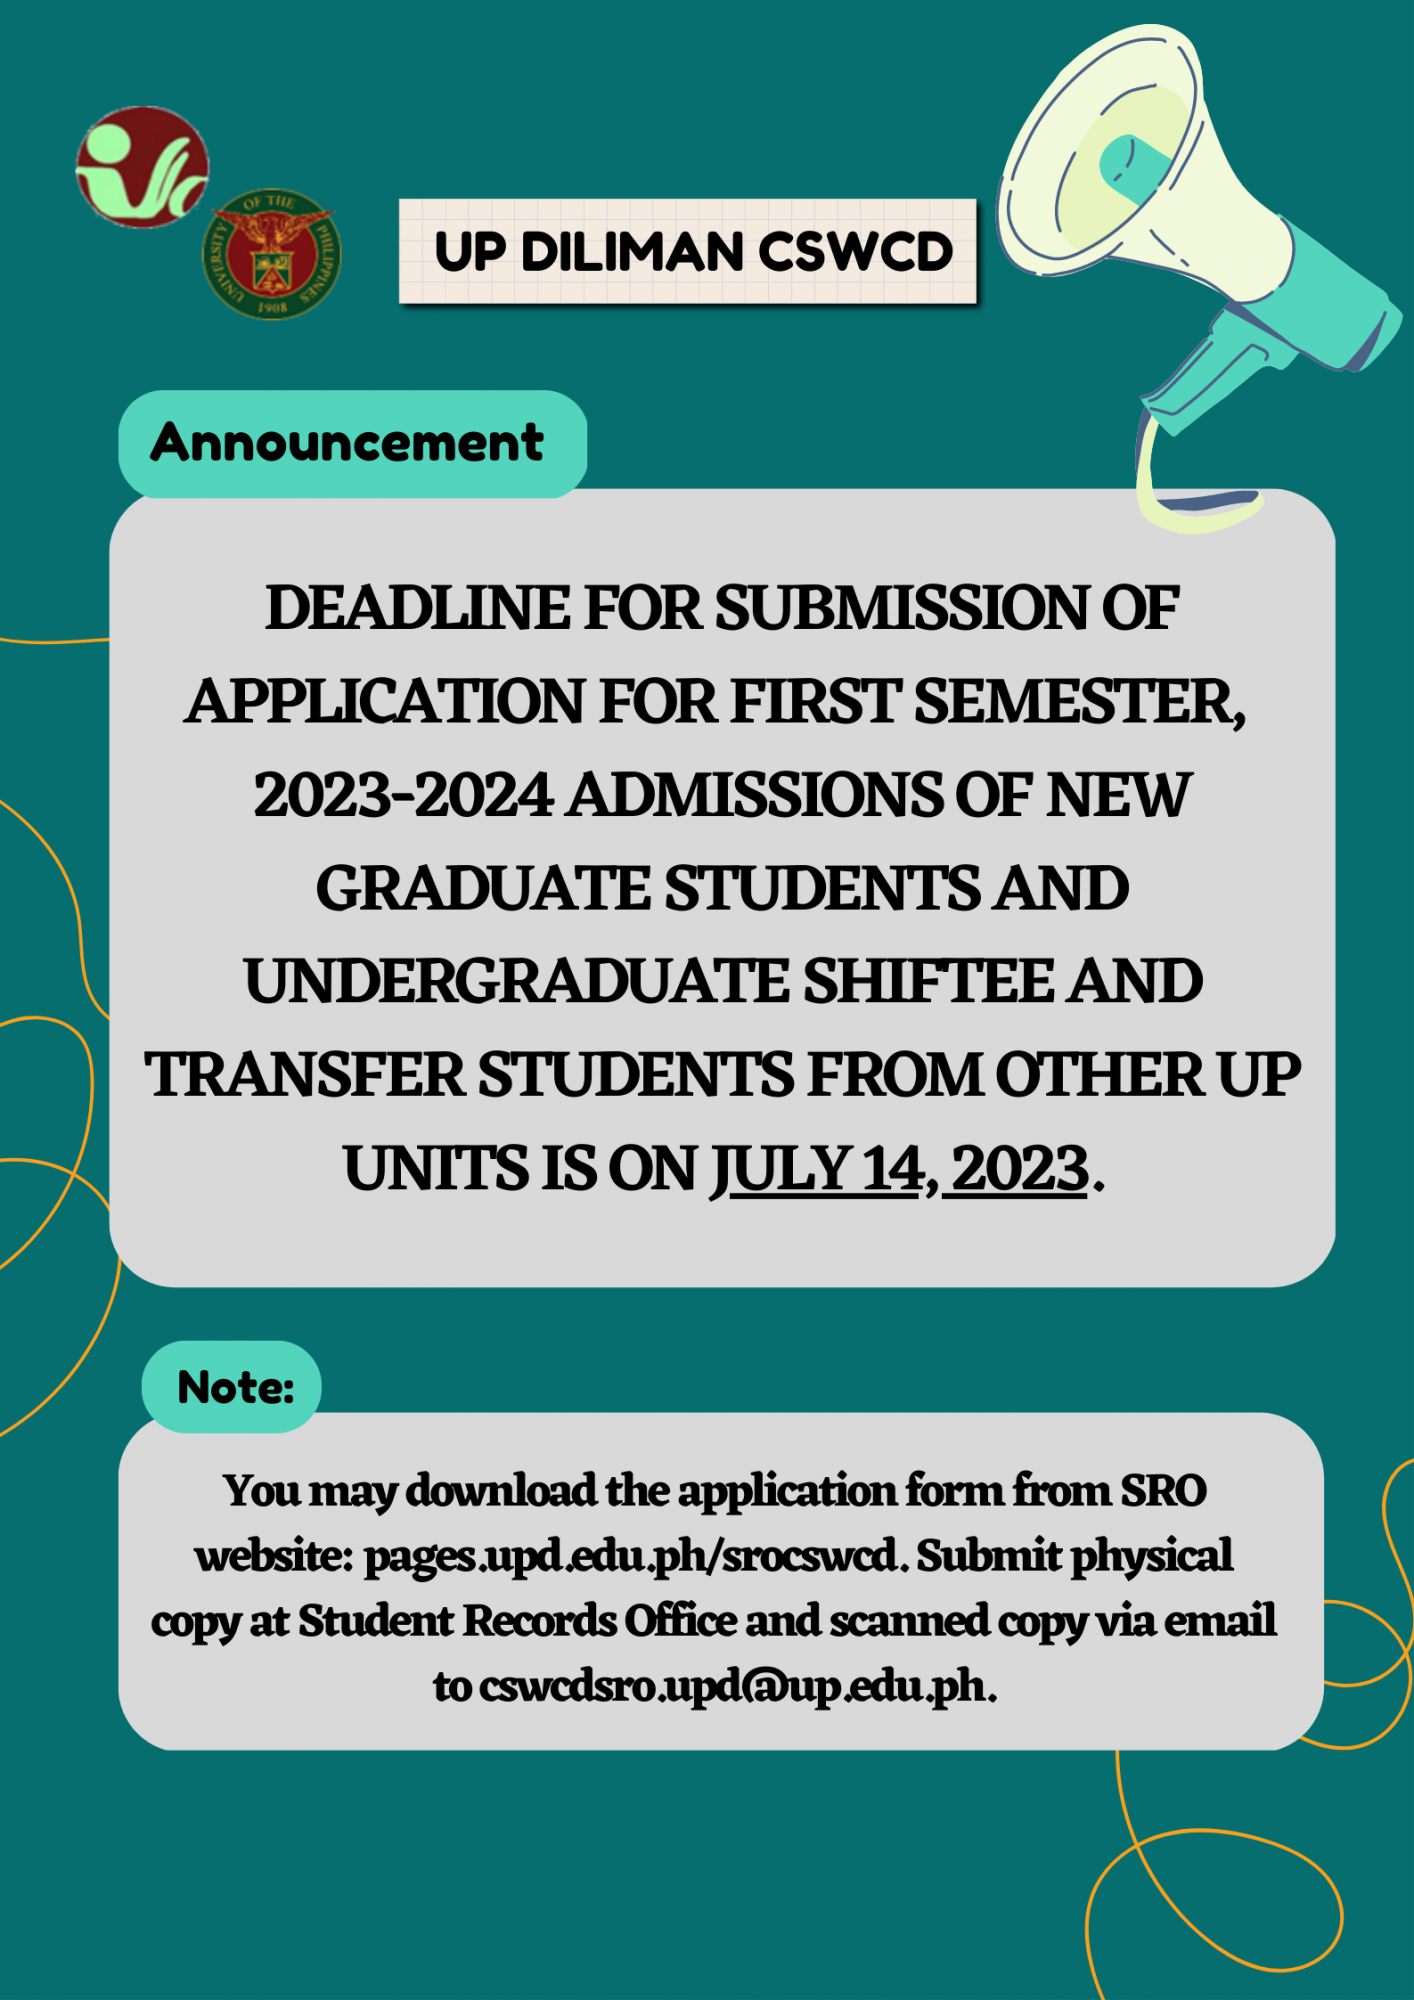 Deadline for Submission of Application for First Semester, 2023-2024 Admissions of New Graduate Students and Undergraduate Shiftee and Transfer Students from other UP units